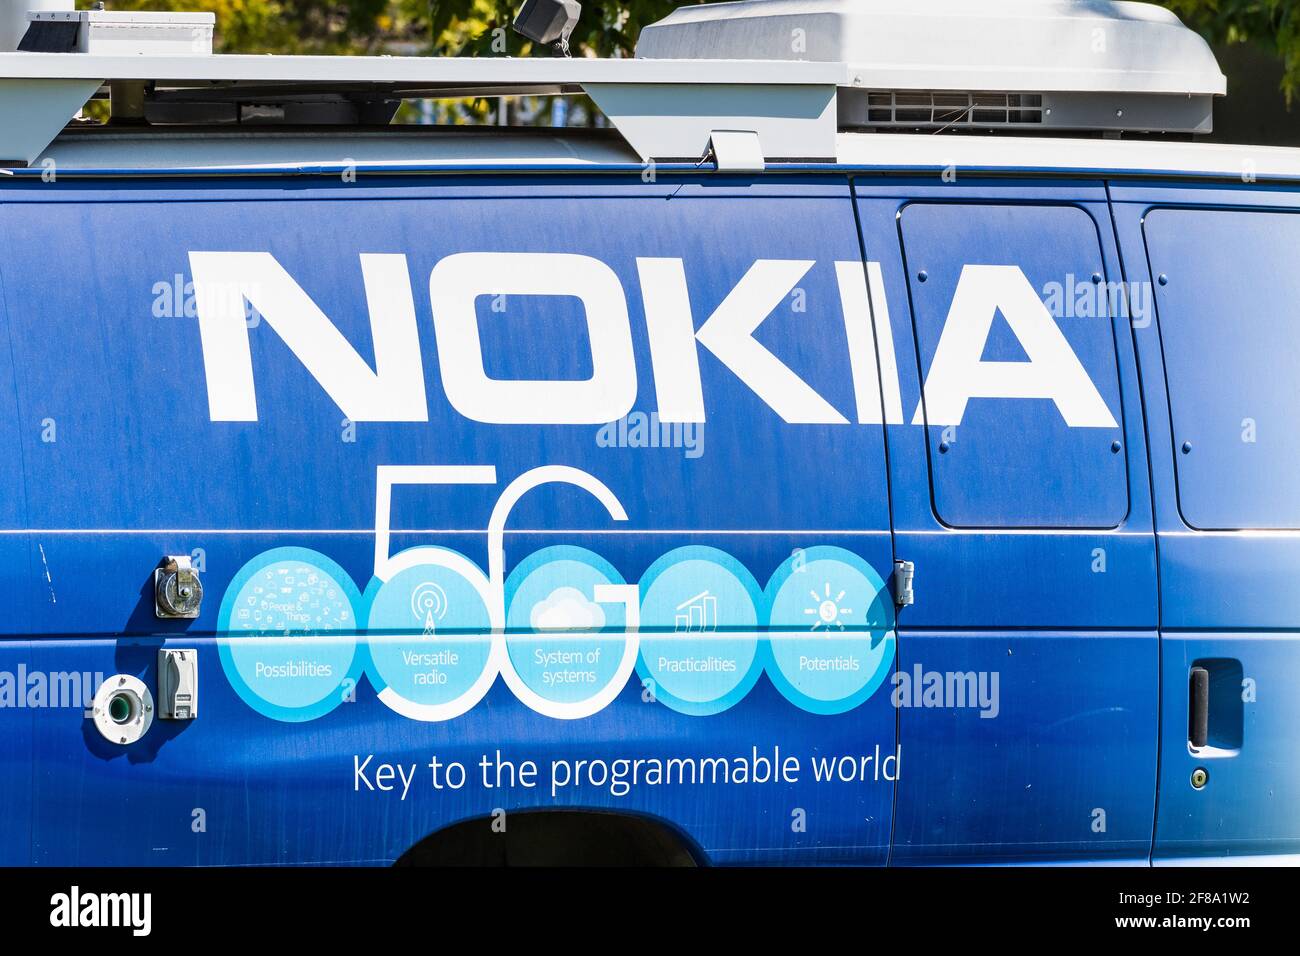 Sep 26, 2020 Mountain View / CA / USA - Nokia 5G logo printed on a van parked at the Company's Silicon Valley campus; Nokia is offering 5G services to Stock Photo